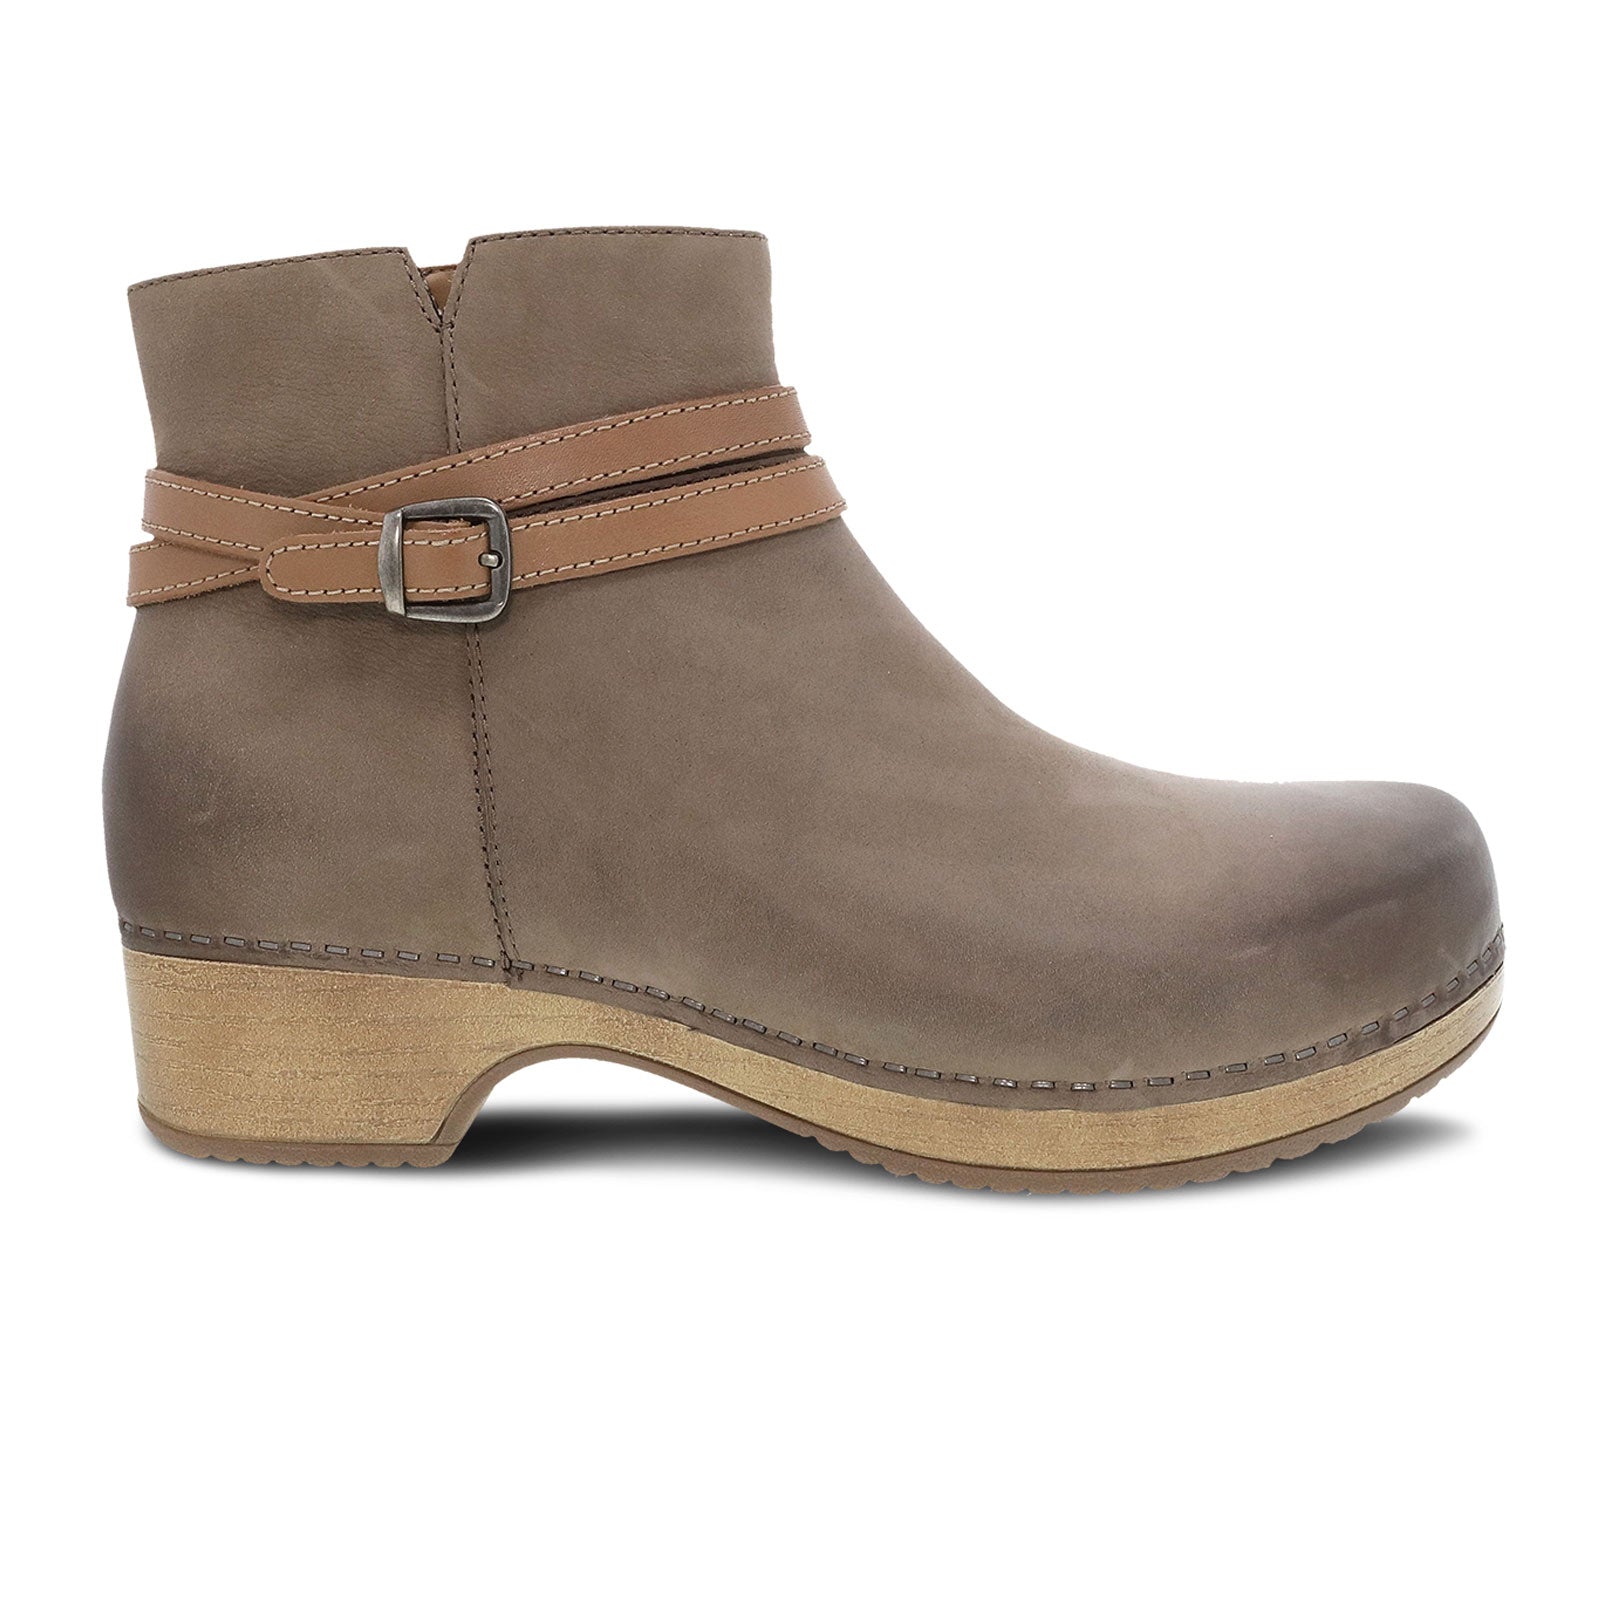 Dansko Brook Ankle Boot (Women) - Taupe Burnished Nubuck Boots - Fashion - Ankle Boot - The Heel Shoe Fitters